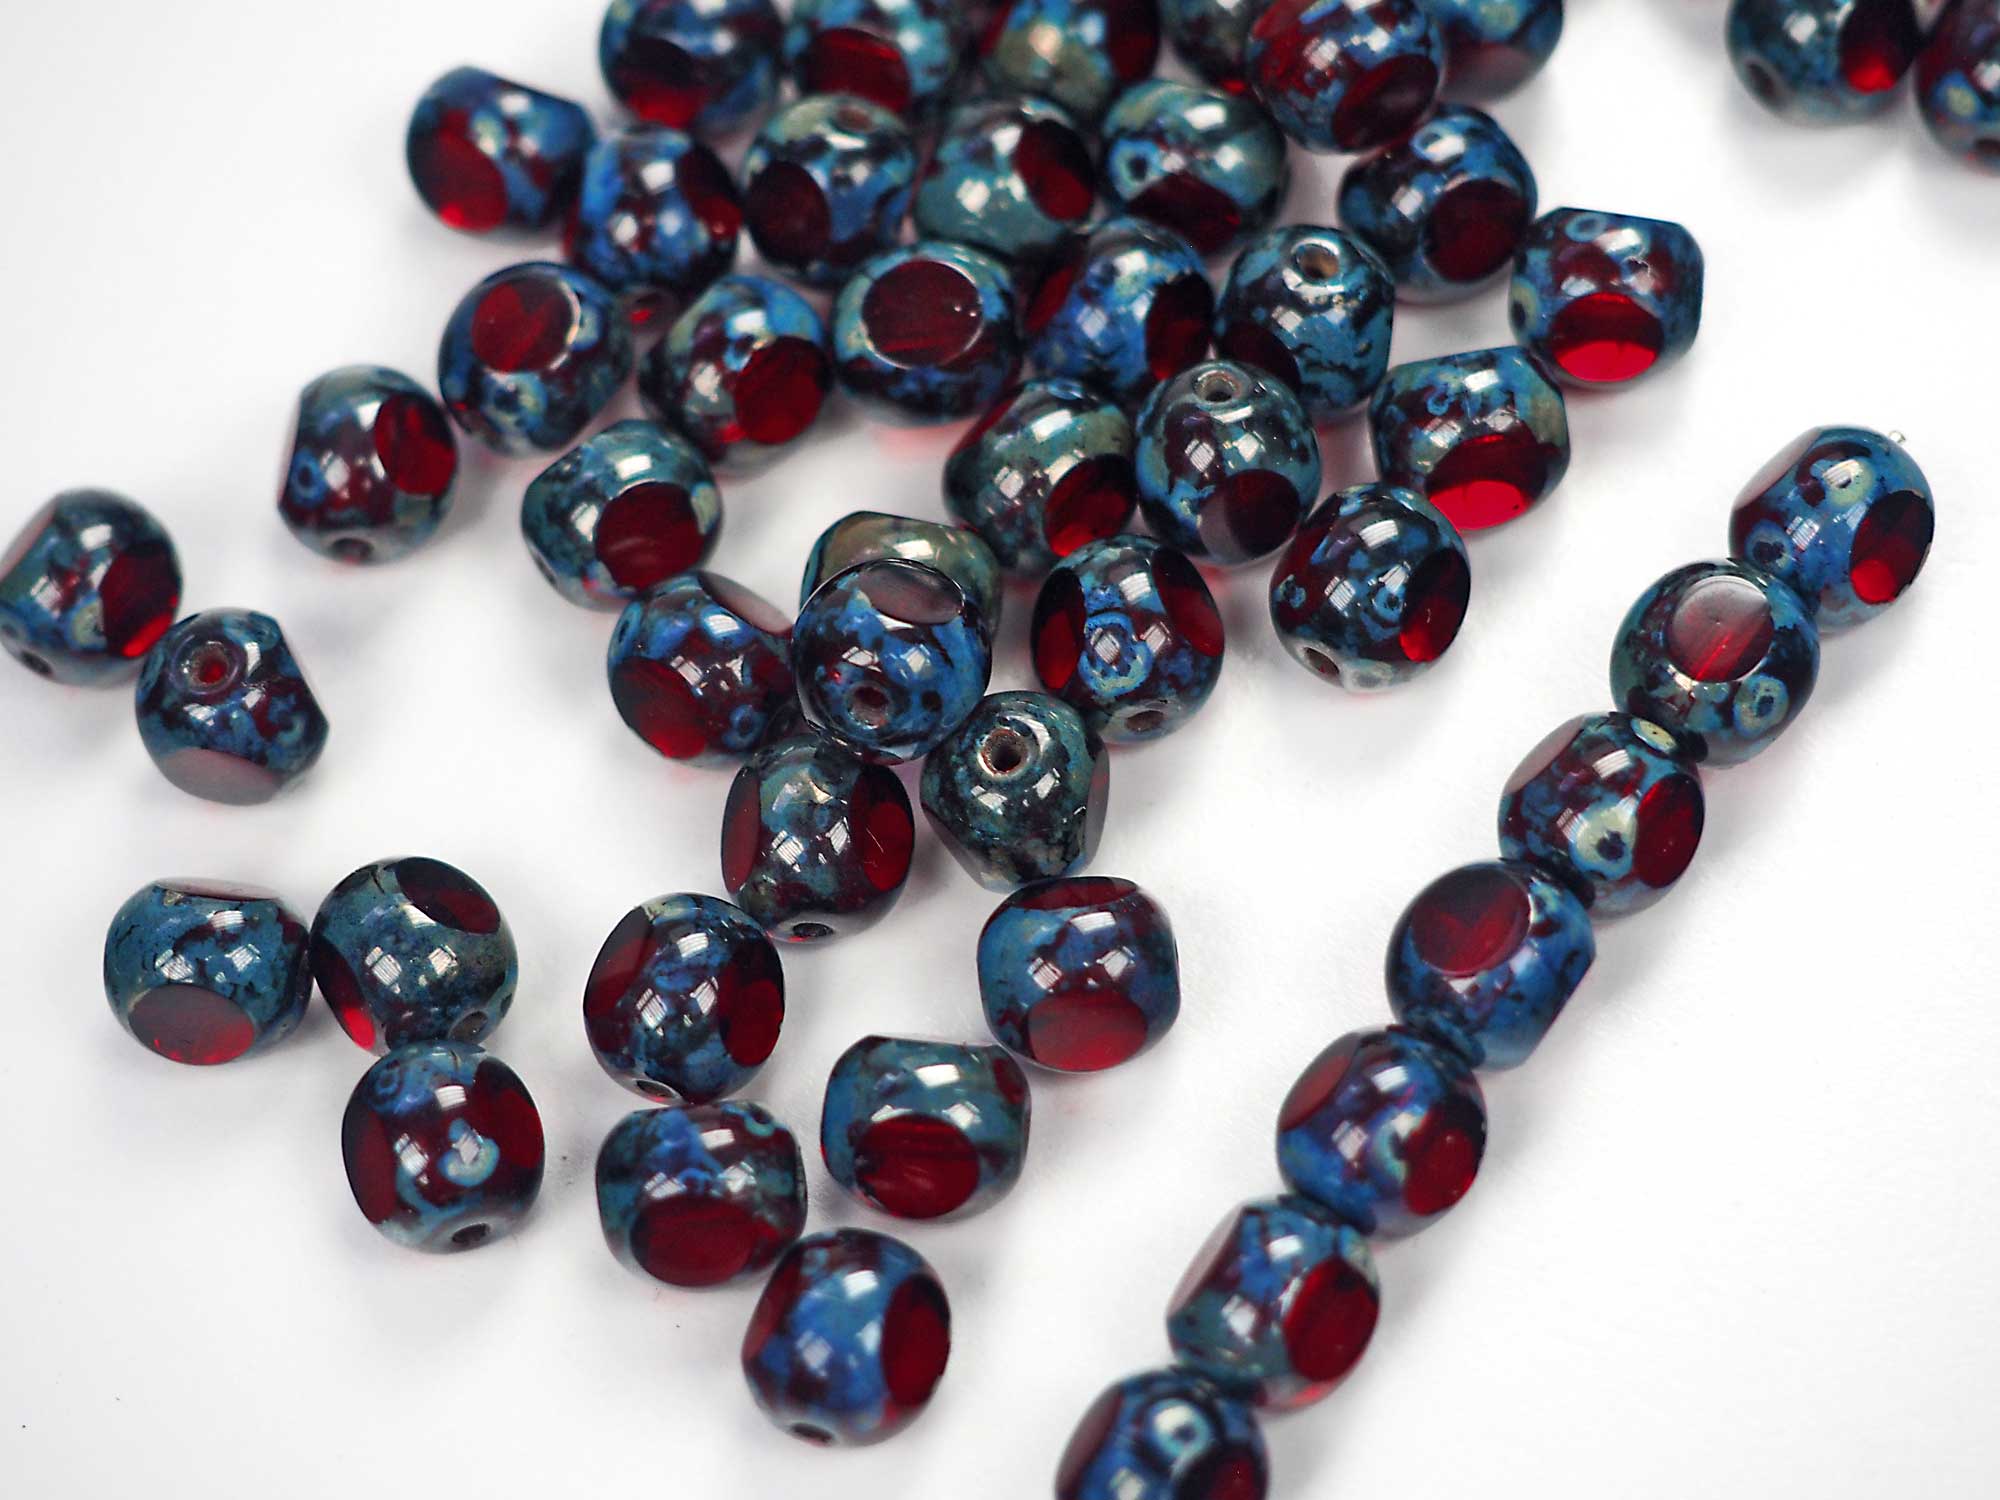 Czech Glass 3-Cut Round Window Beads (Soccer Ball Bead) Art. 151-19501 in size 8mm, Siam red Picasso coated, 36pcs, P877